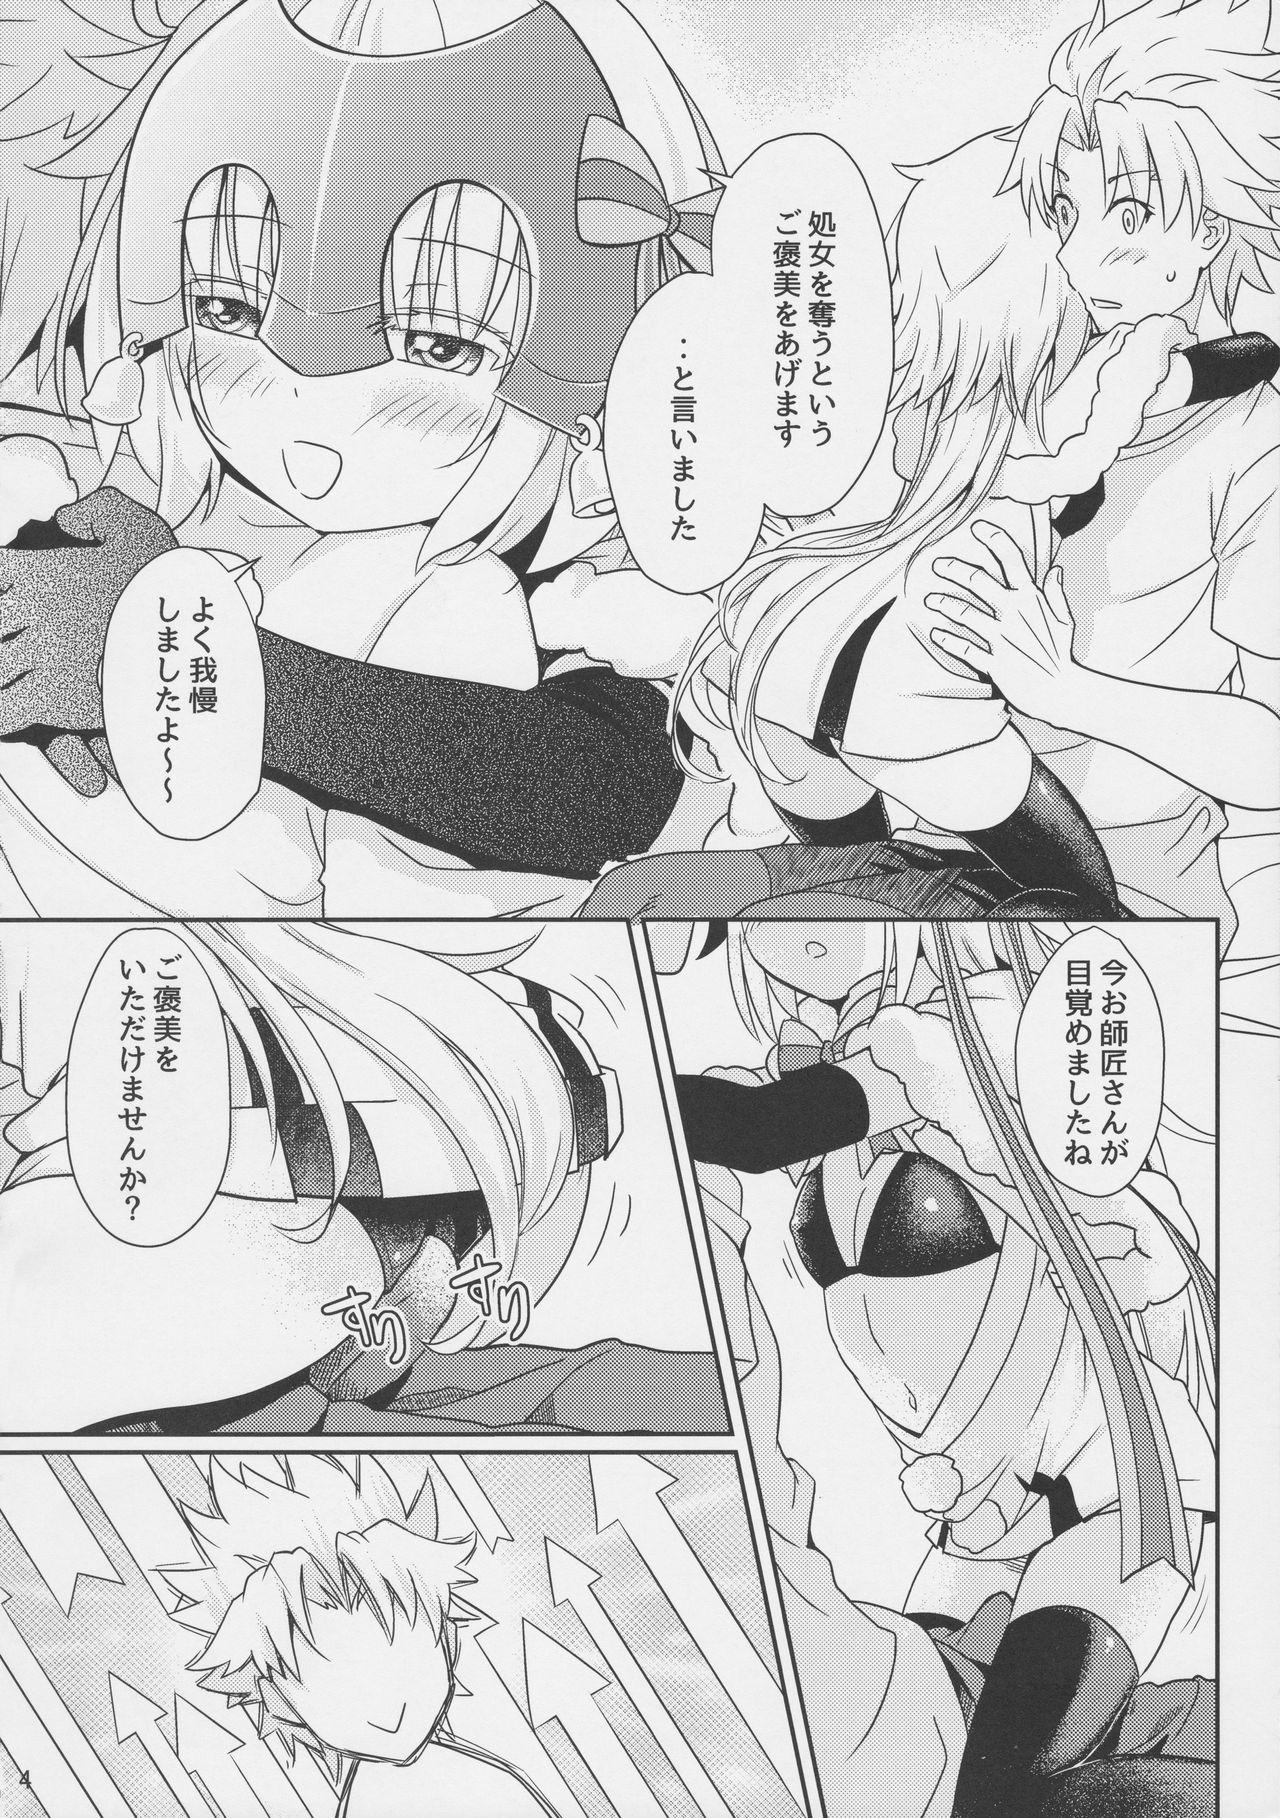 Wet Jeanne Lily wa Yoiko? - Fate grand order Brunettes - Page 5